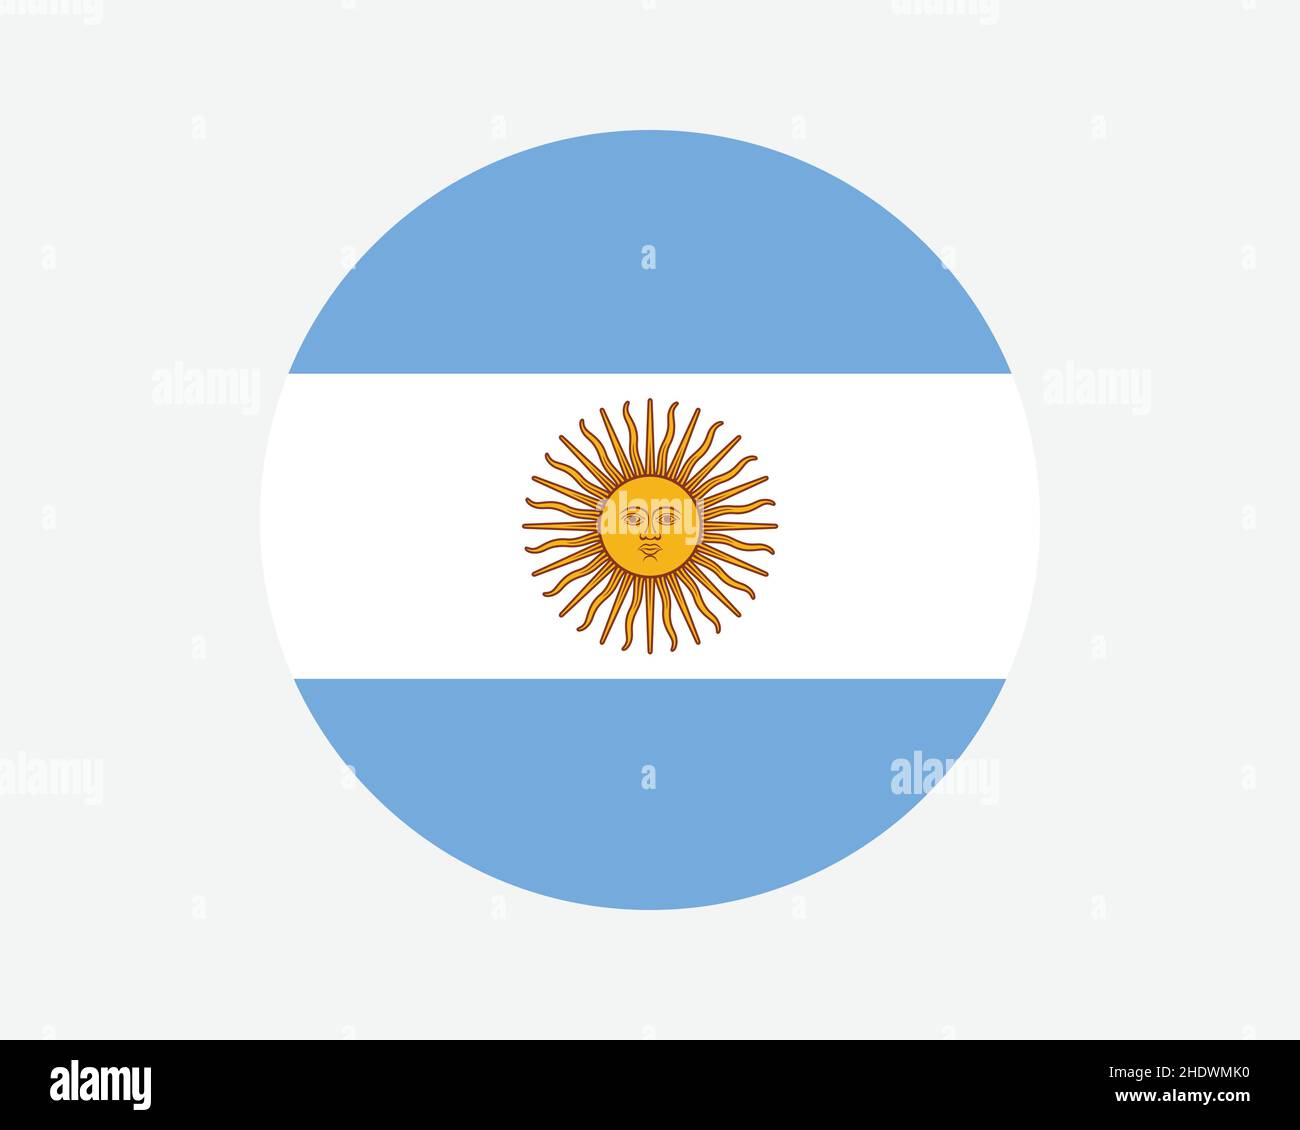 Argentina Round Country Flag. Circular Argentinian National Flag. Argentine Republic Circle Shape Button Banner. EPS Vector Illustration. Stock Vector